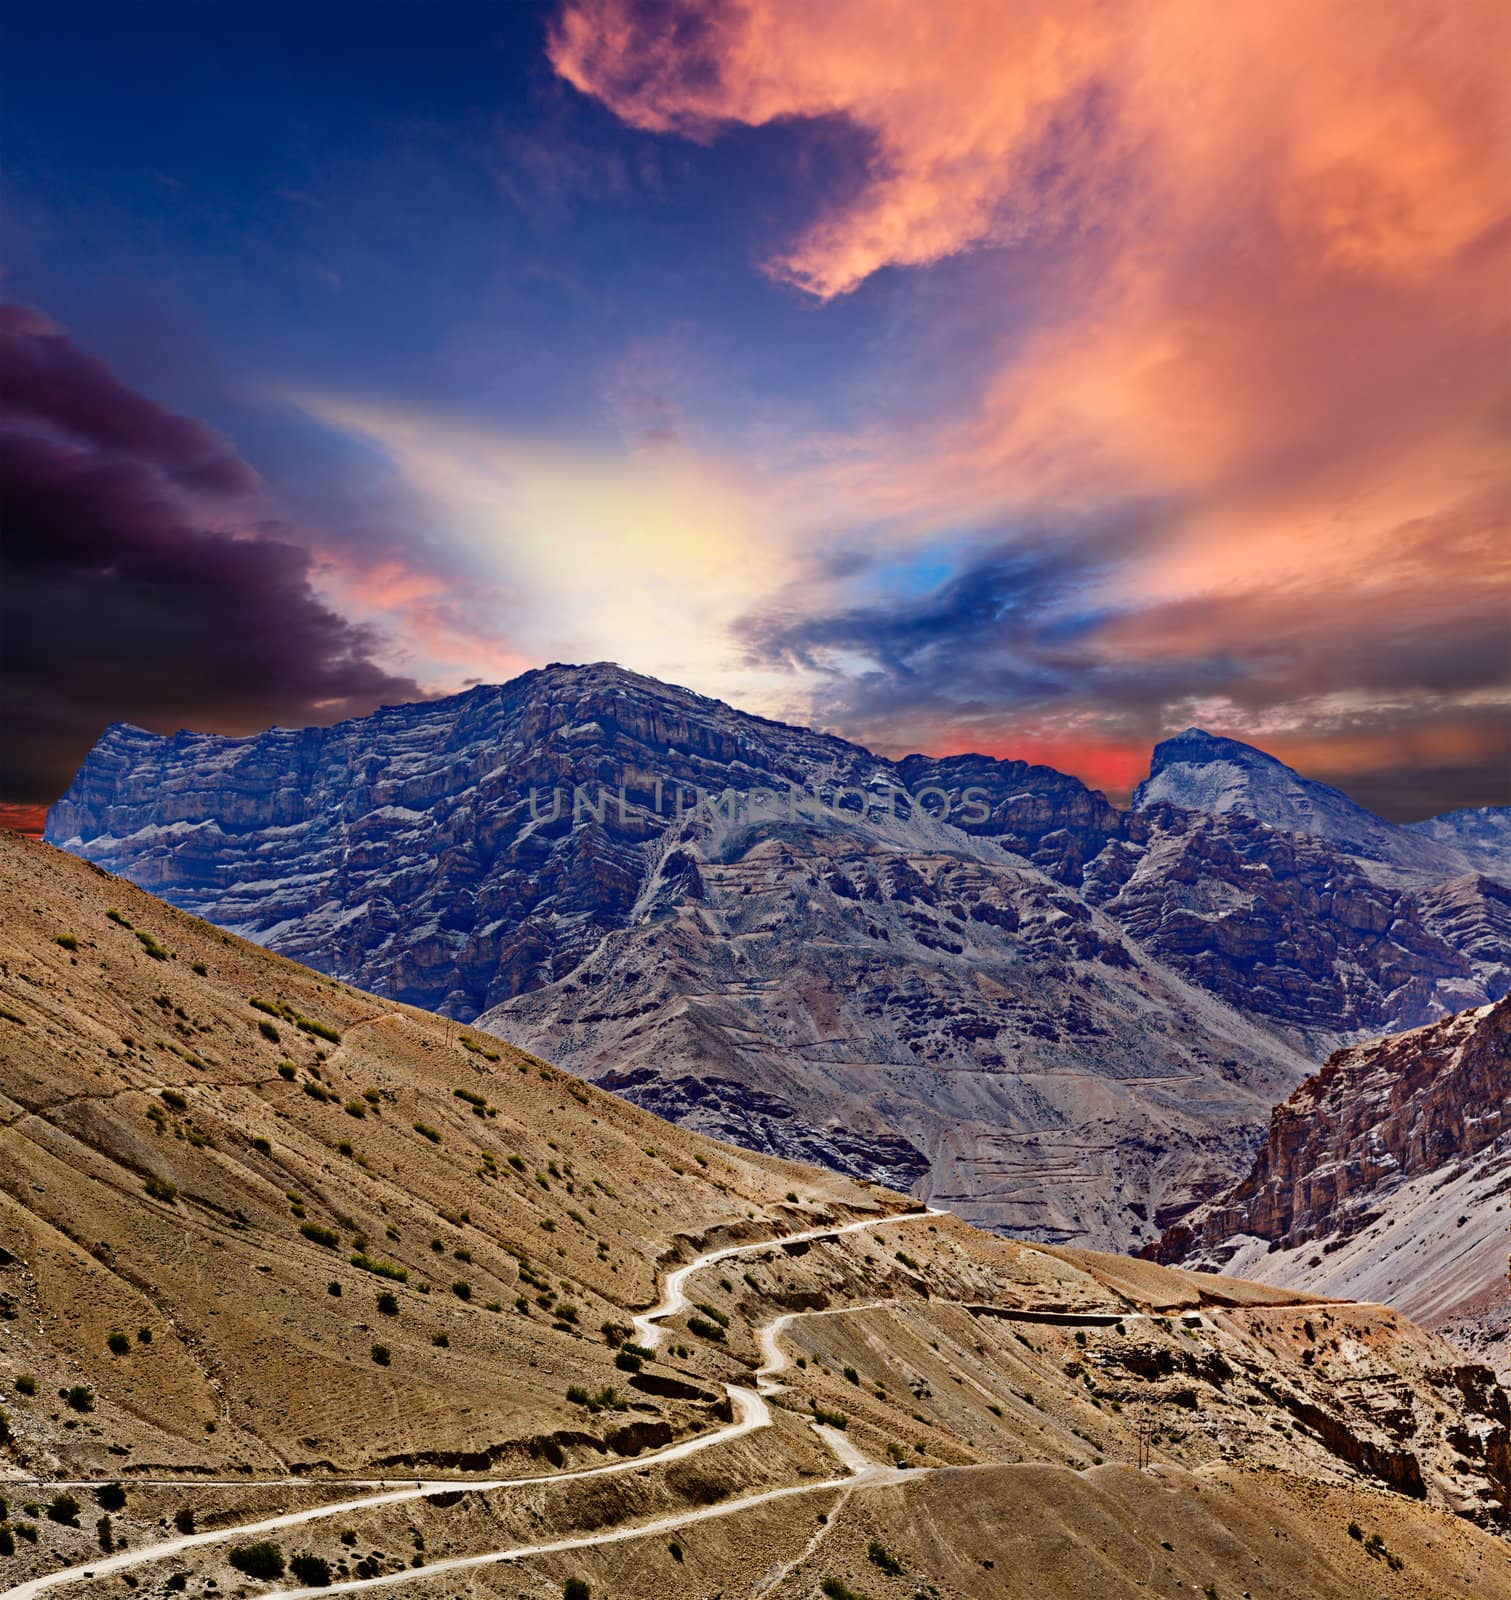 Road in Himalayas by dimol